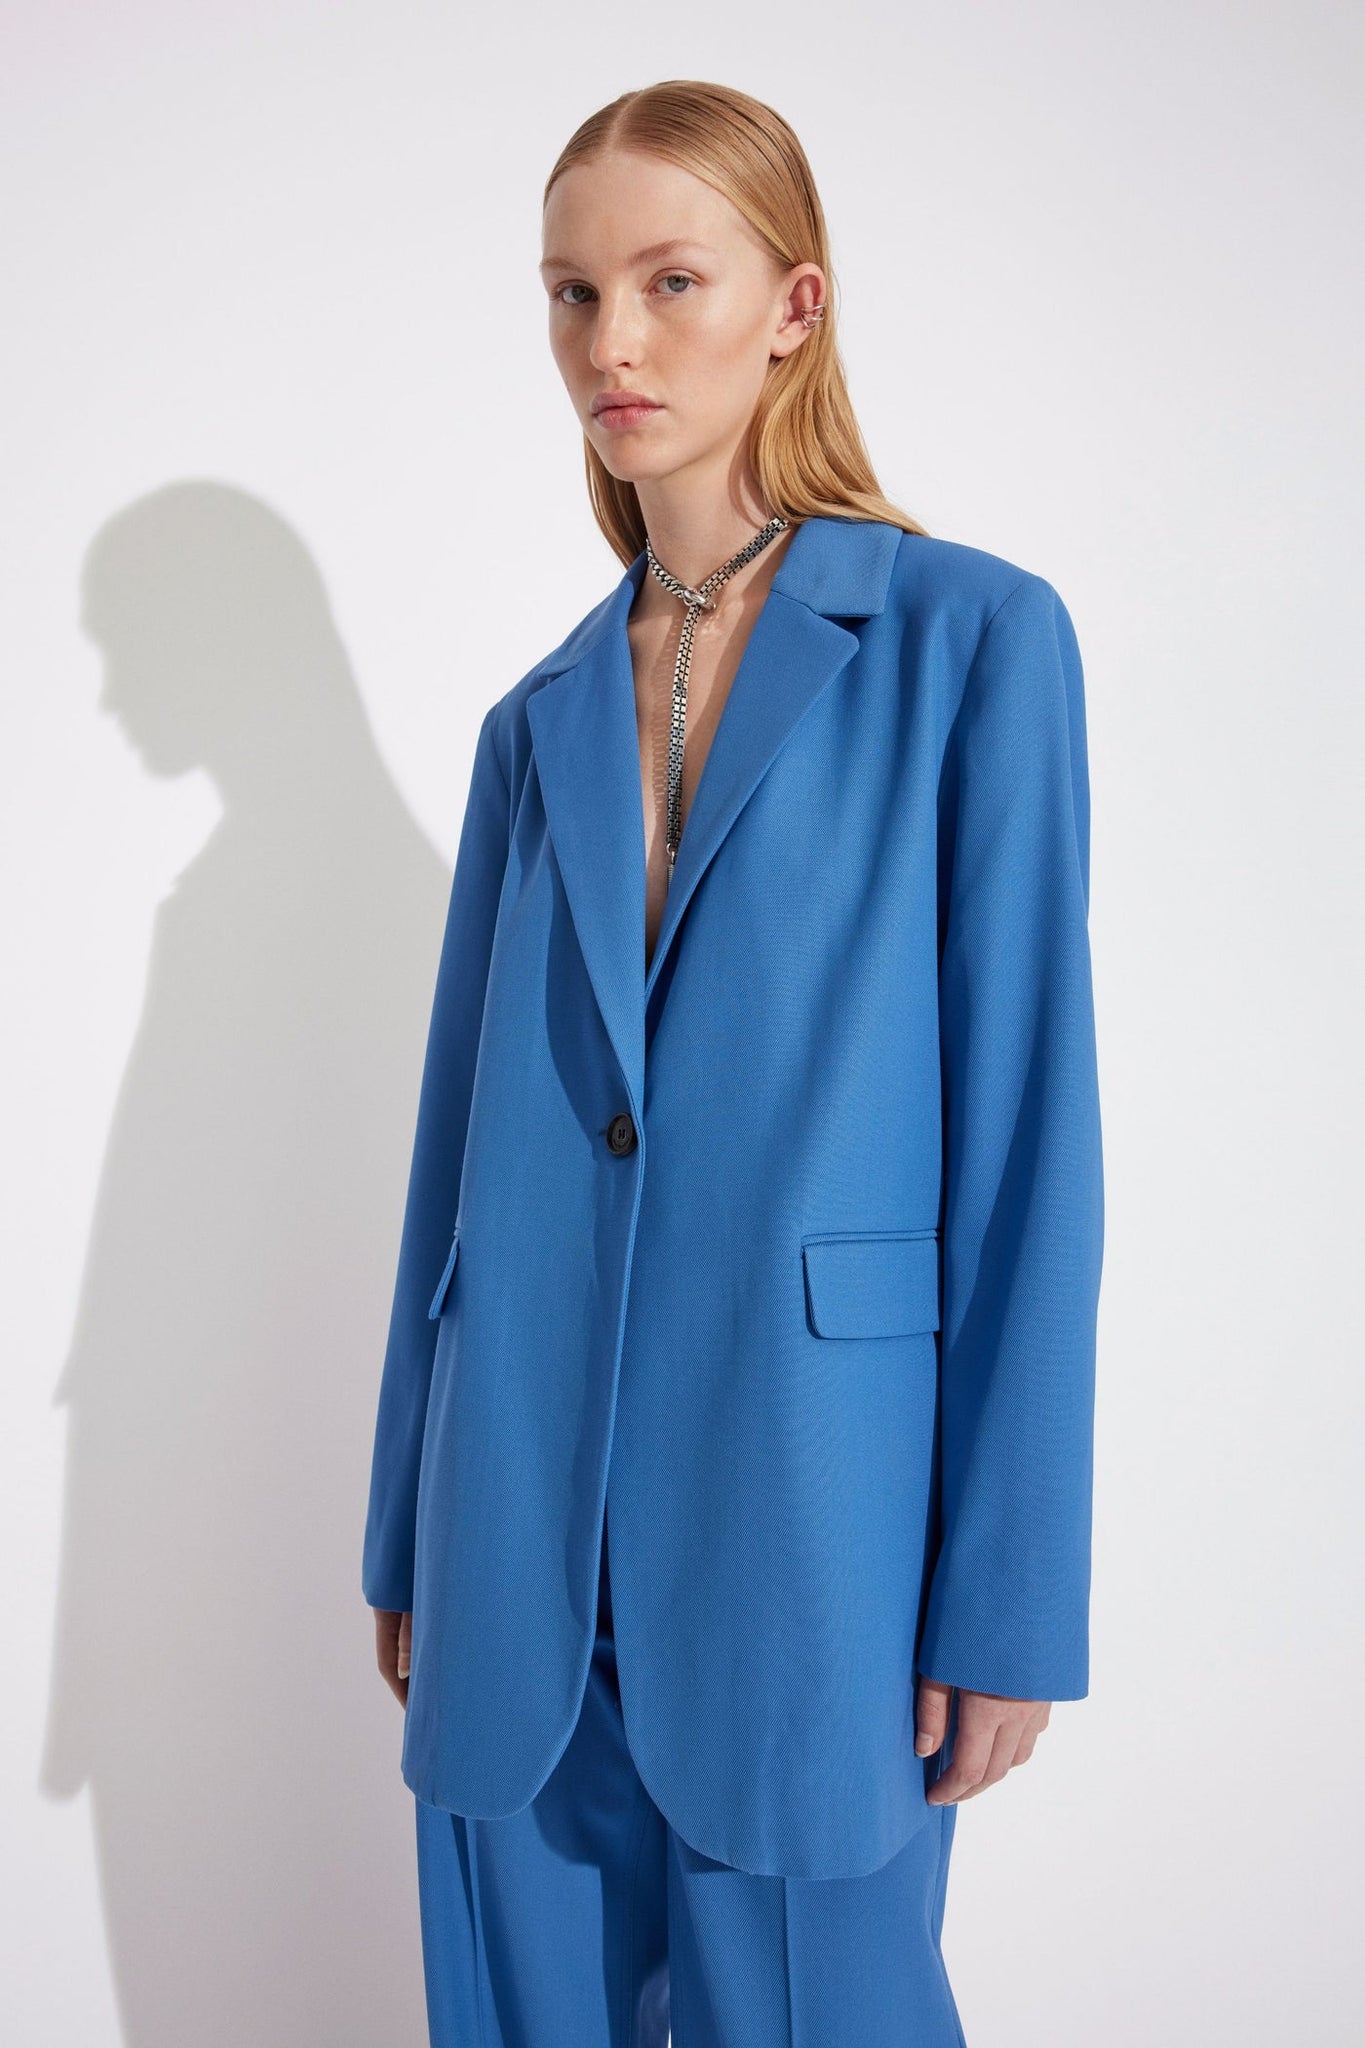 Scout blazer by won hundred in federal blue